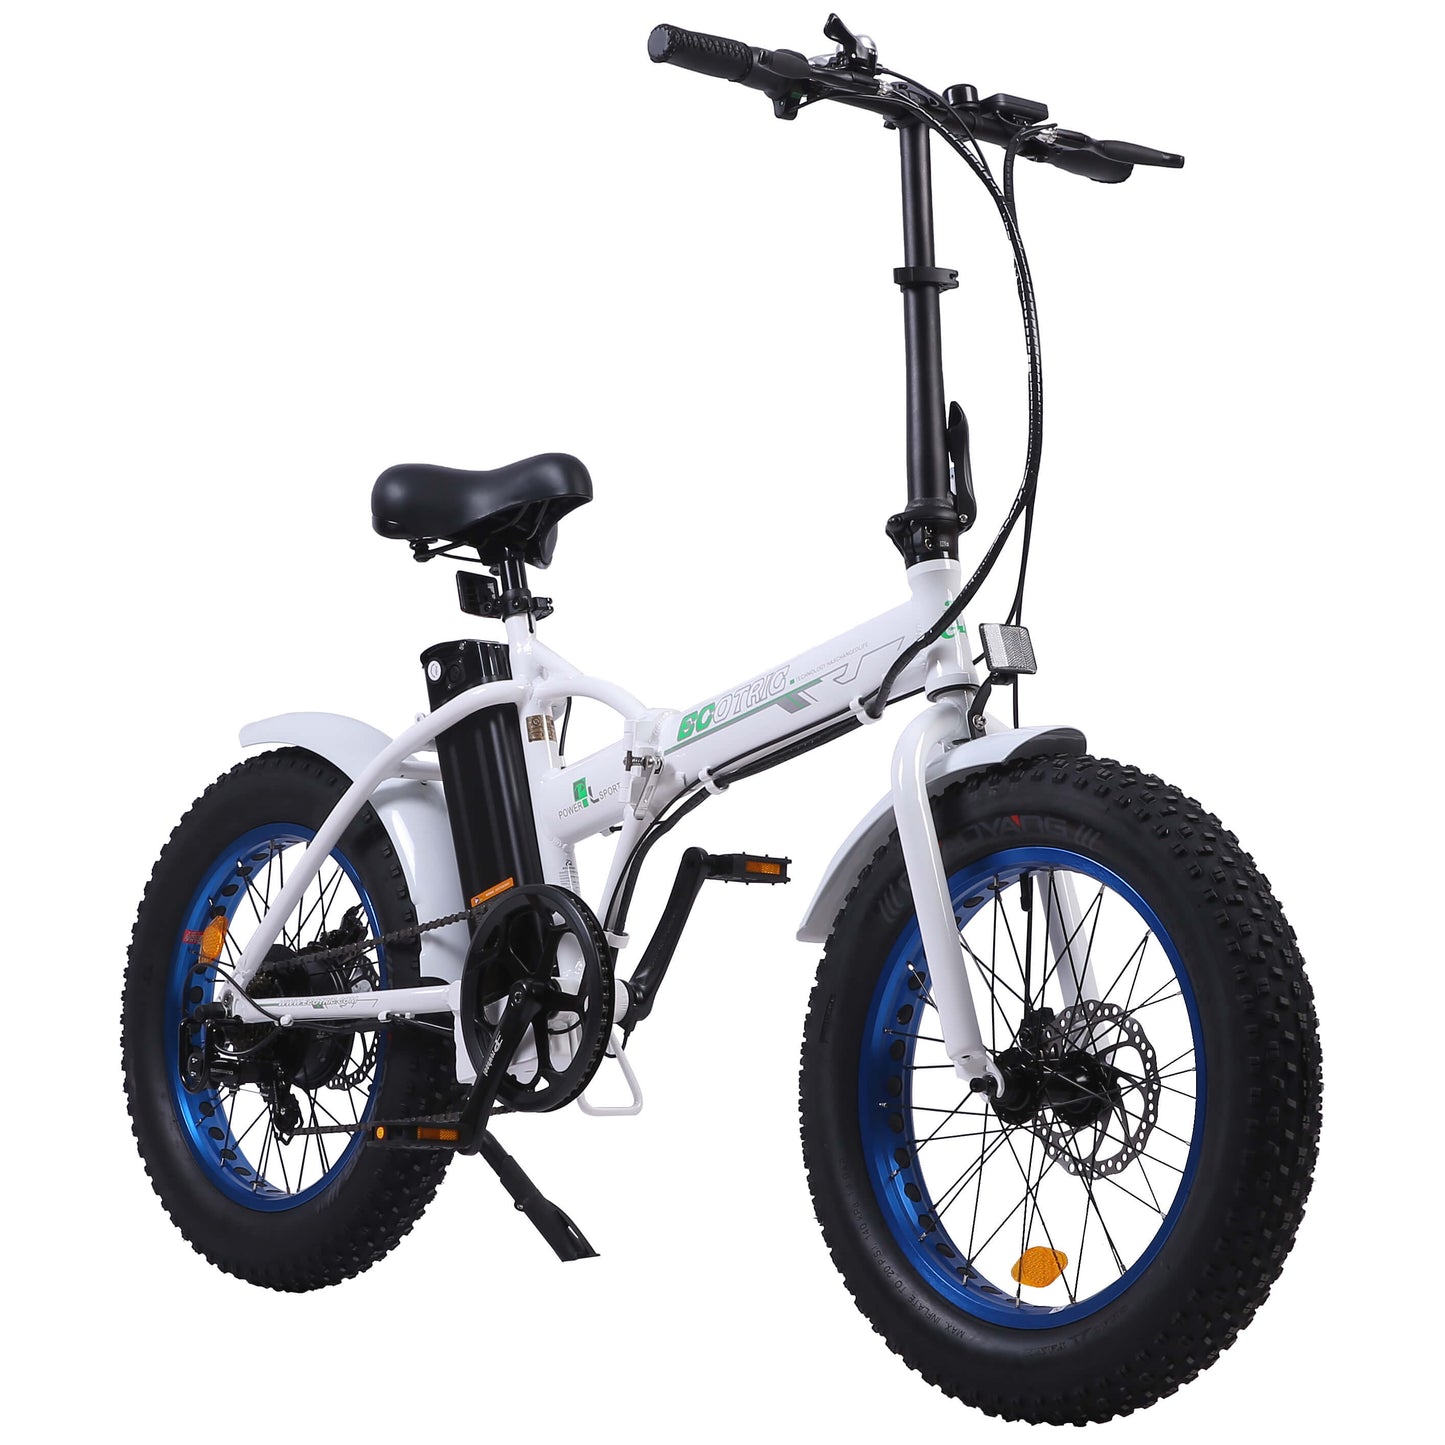 UL Certified - Ecotric Fat Tire Portable and Folding Electric Bike - White and Blue